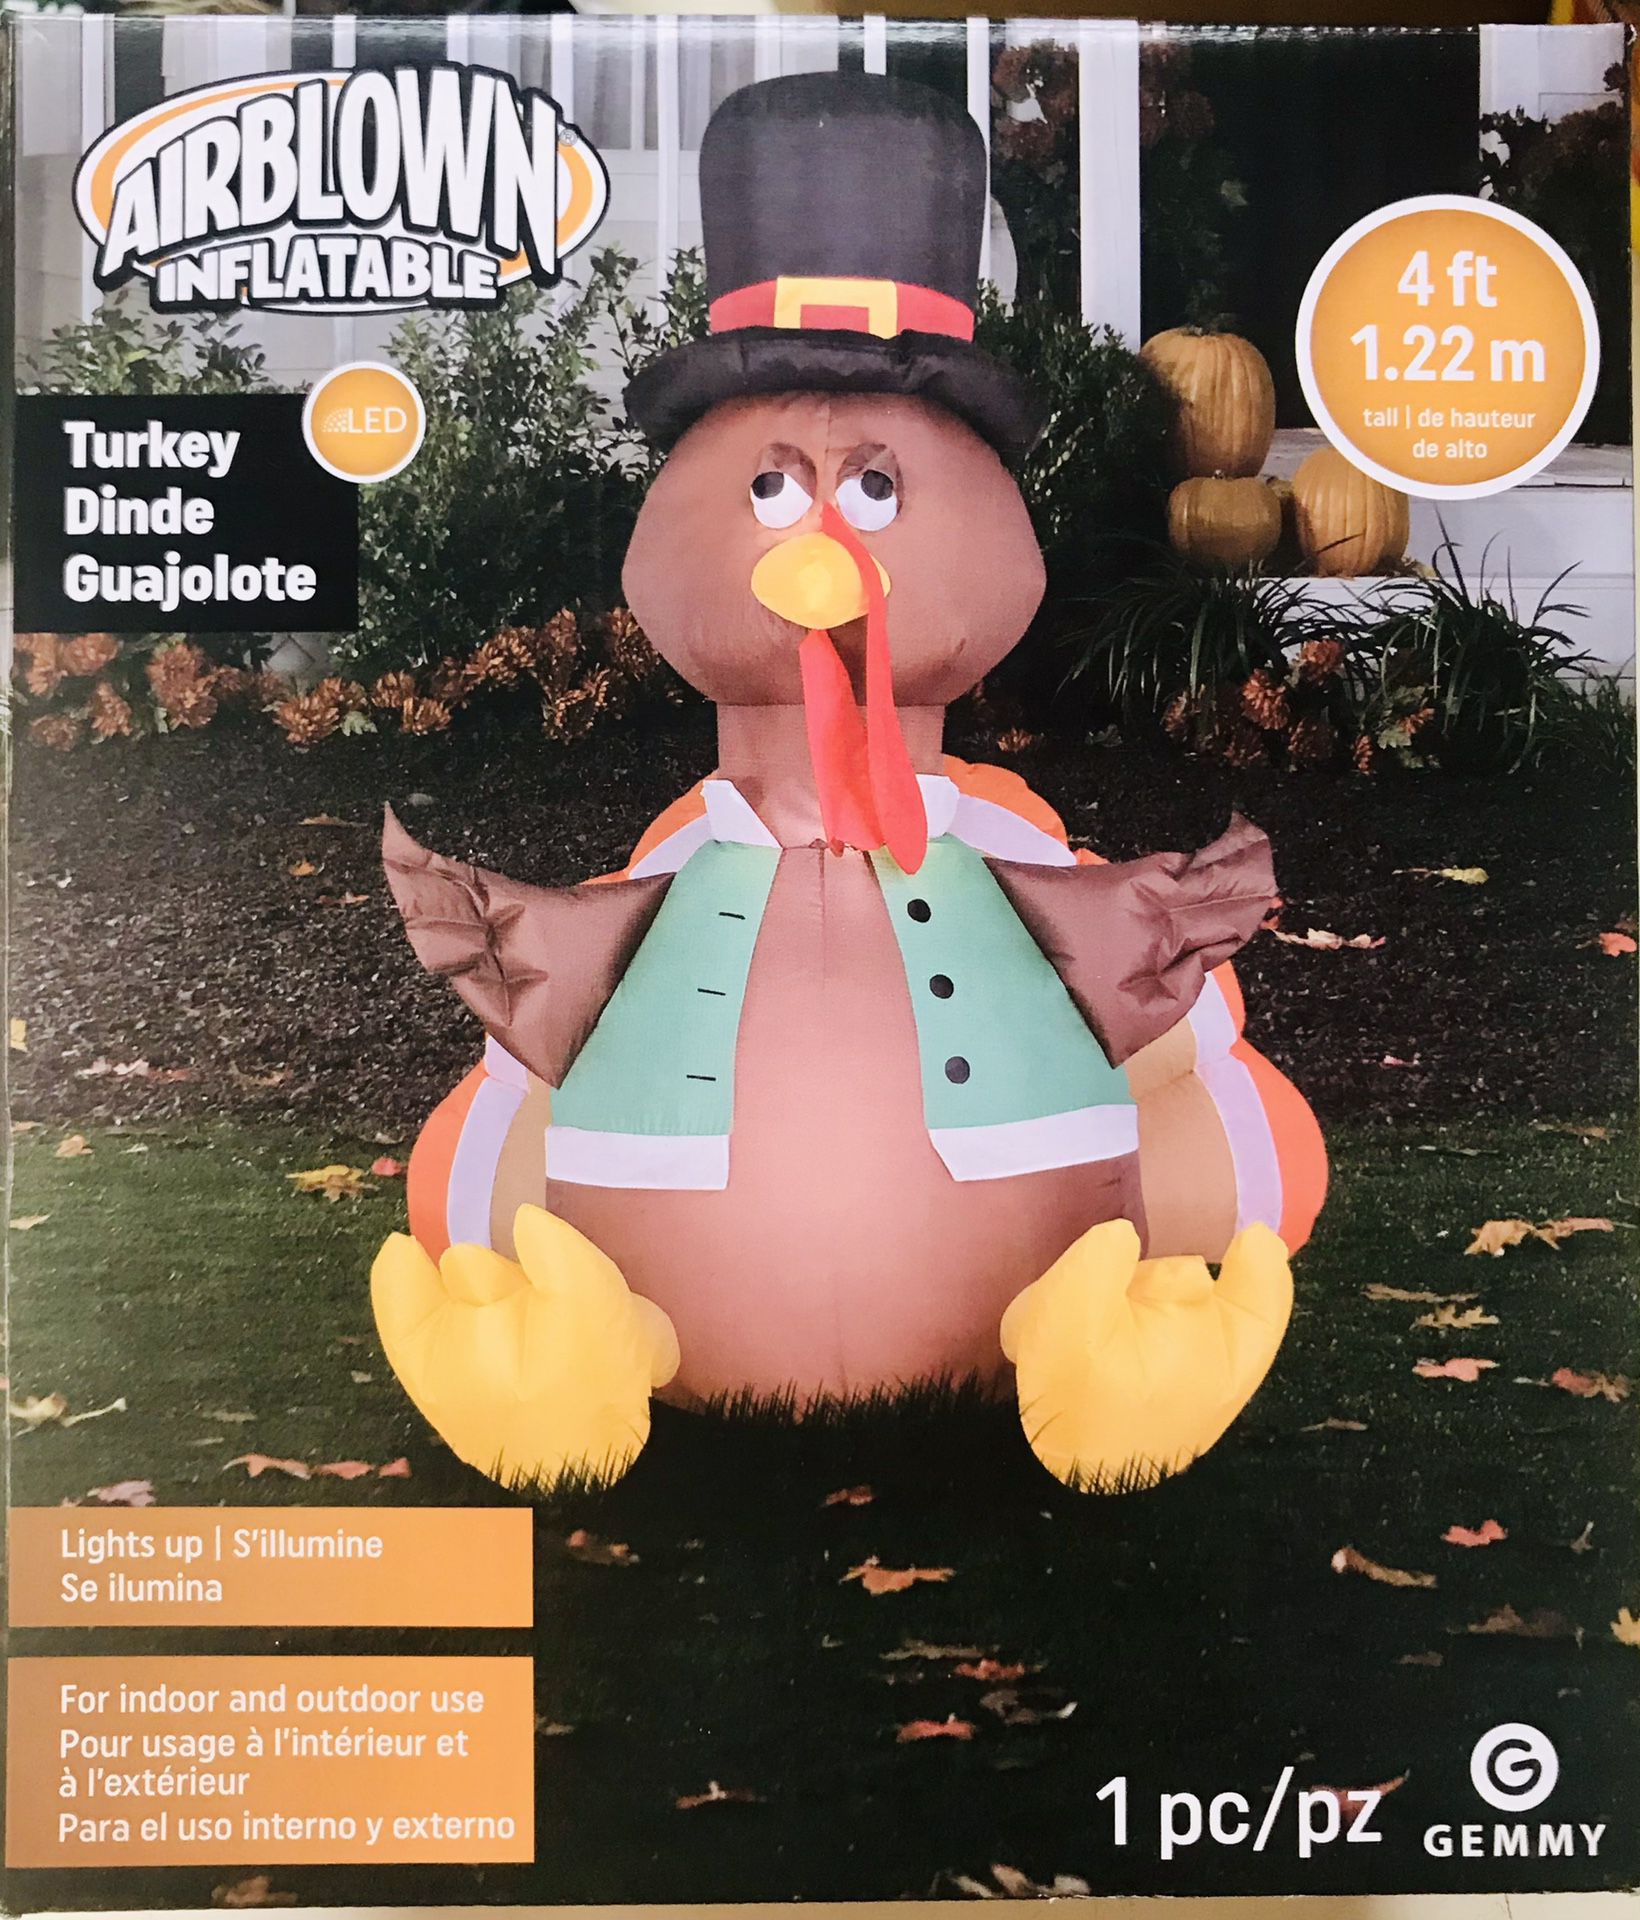 4 FT. ILLUMINATED TURKEY AIR BLOWN YARD INFLATABLE FOR THANKSGIVING DECORATION